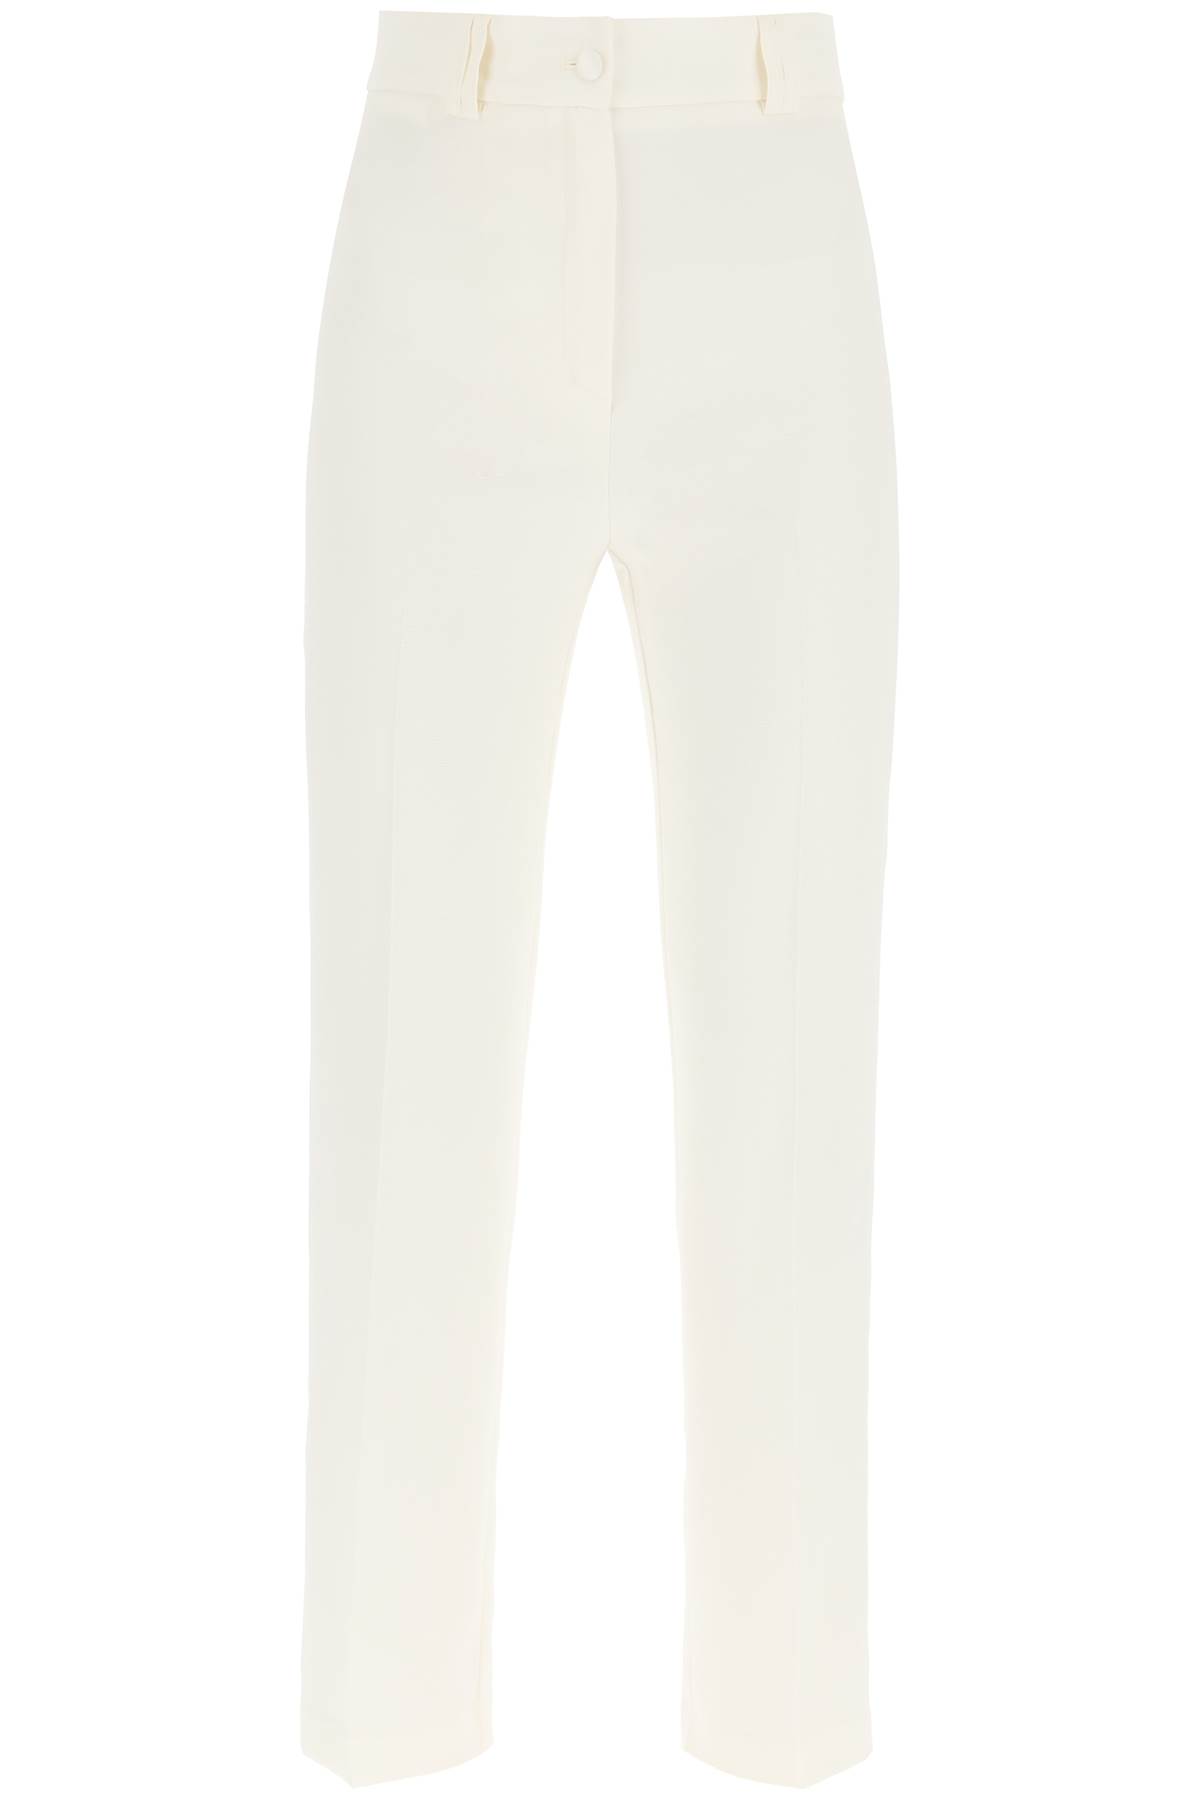 loulou Cady Trousers